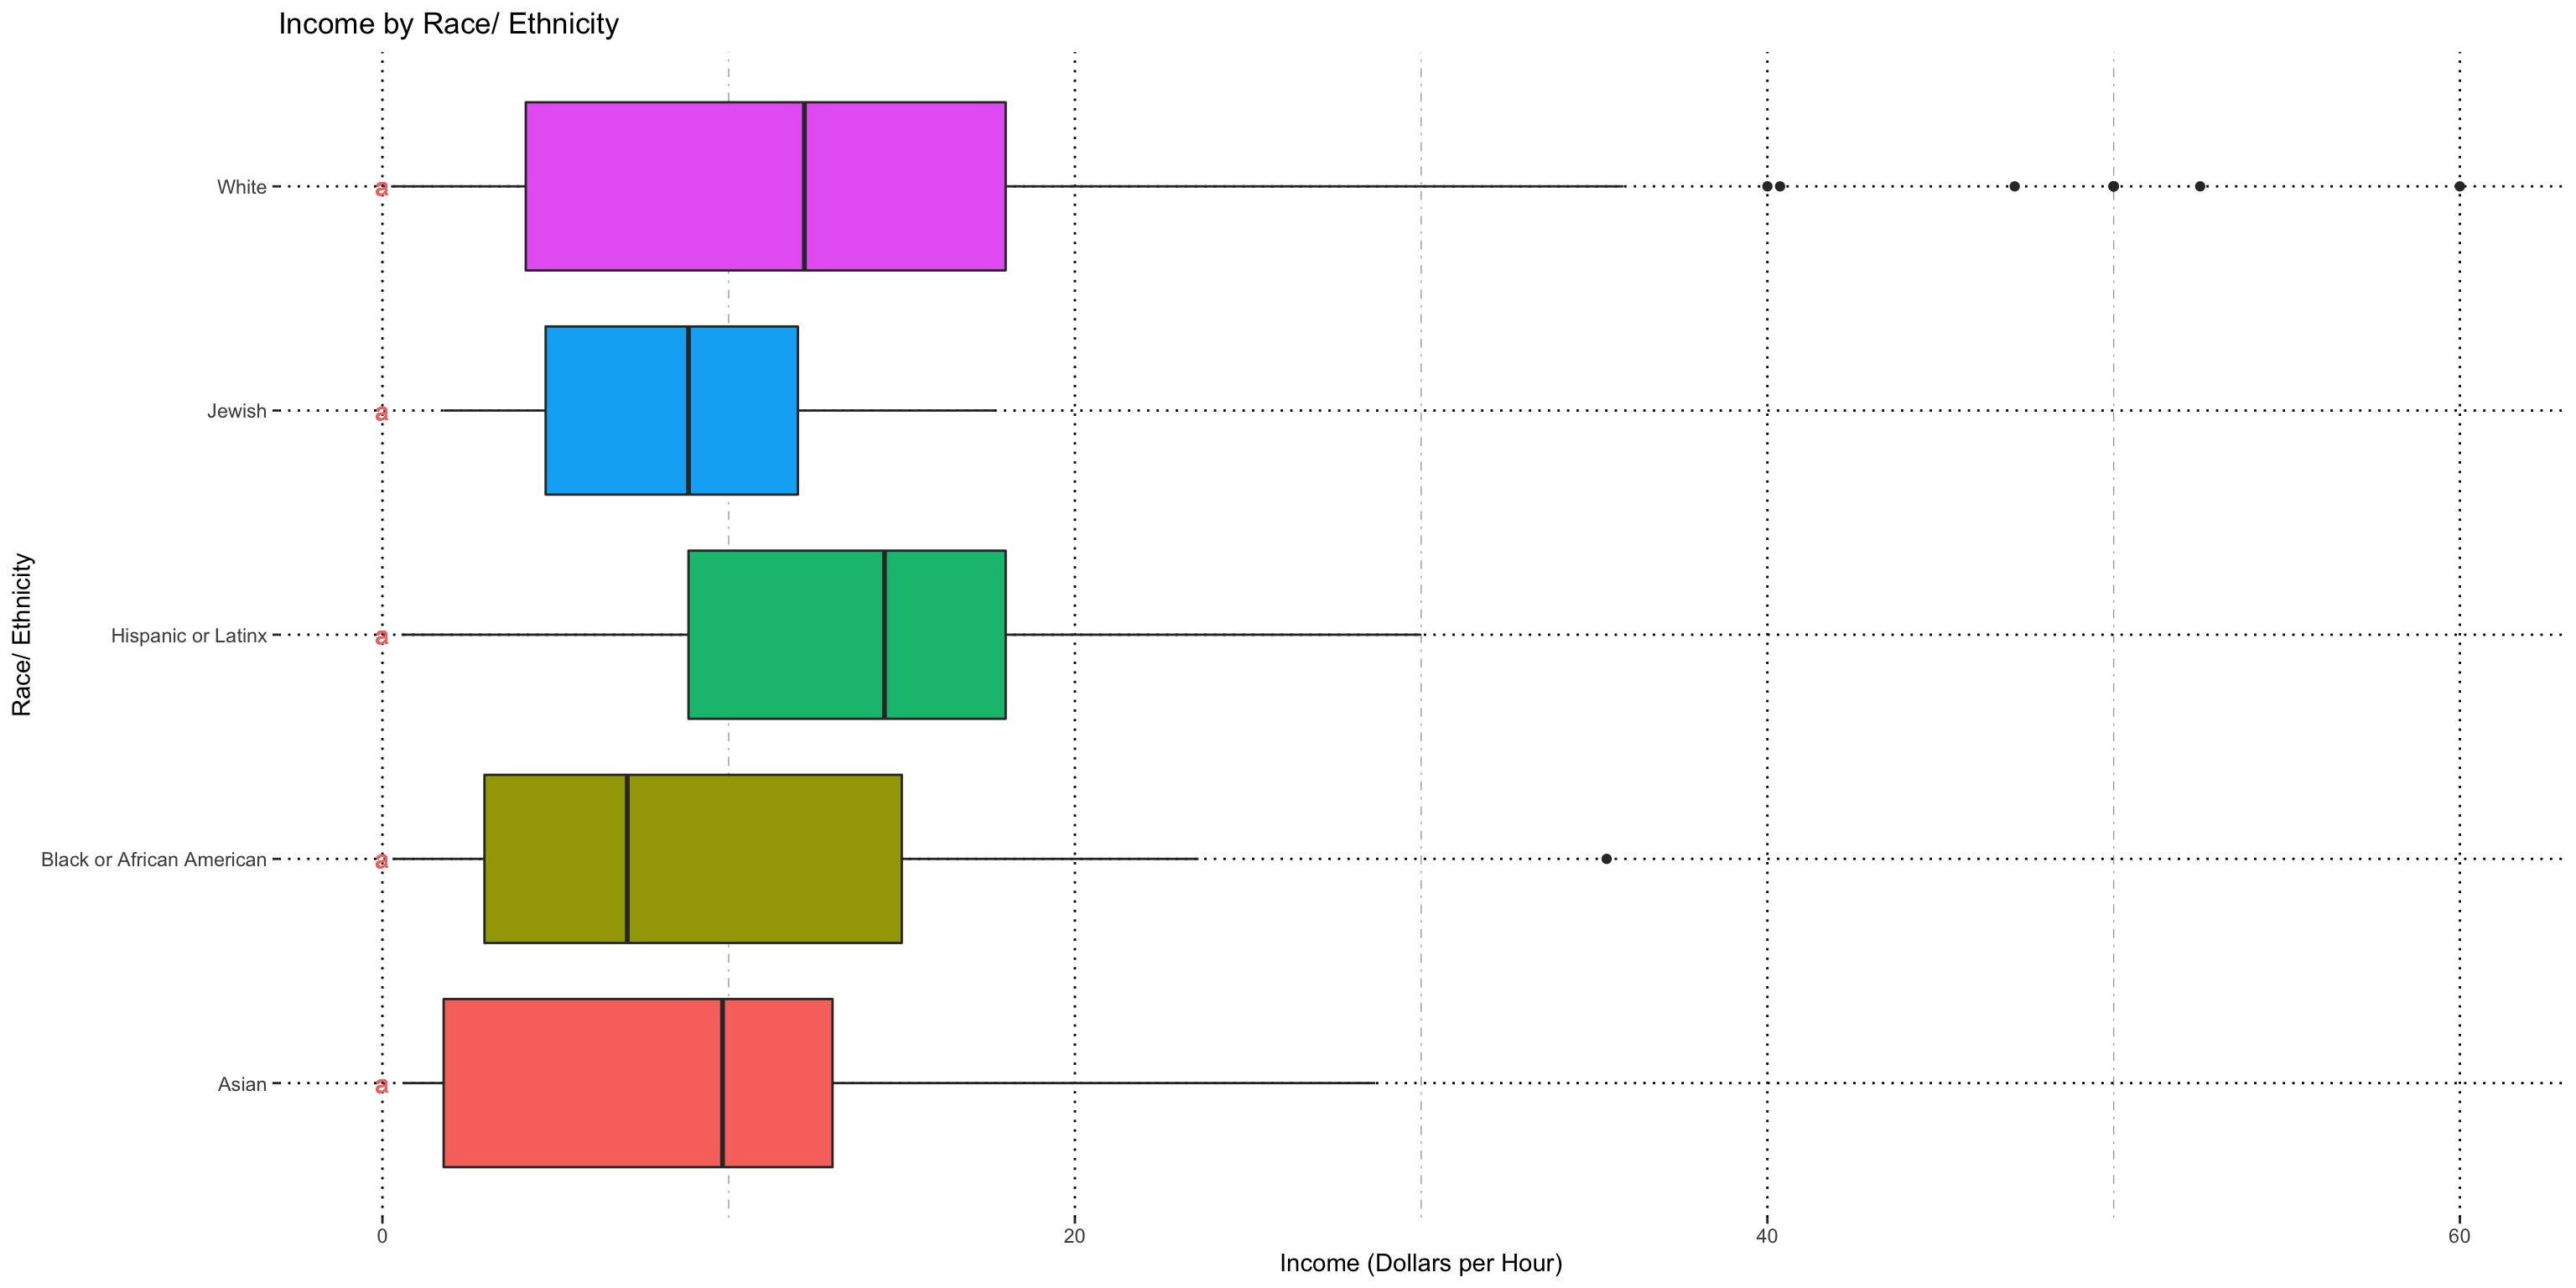 Tukey Groups and Boxplot Income by Race